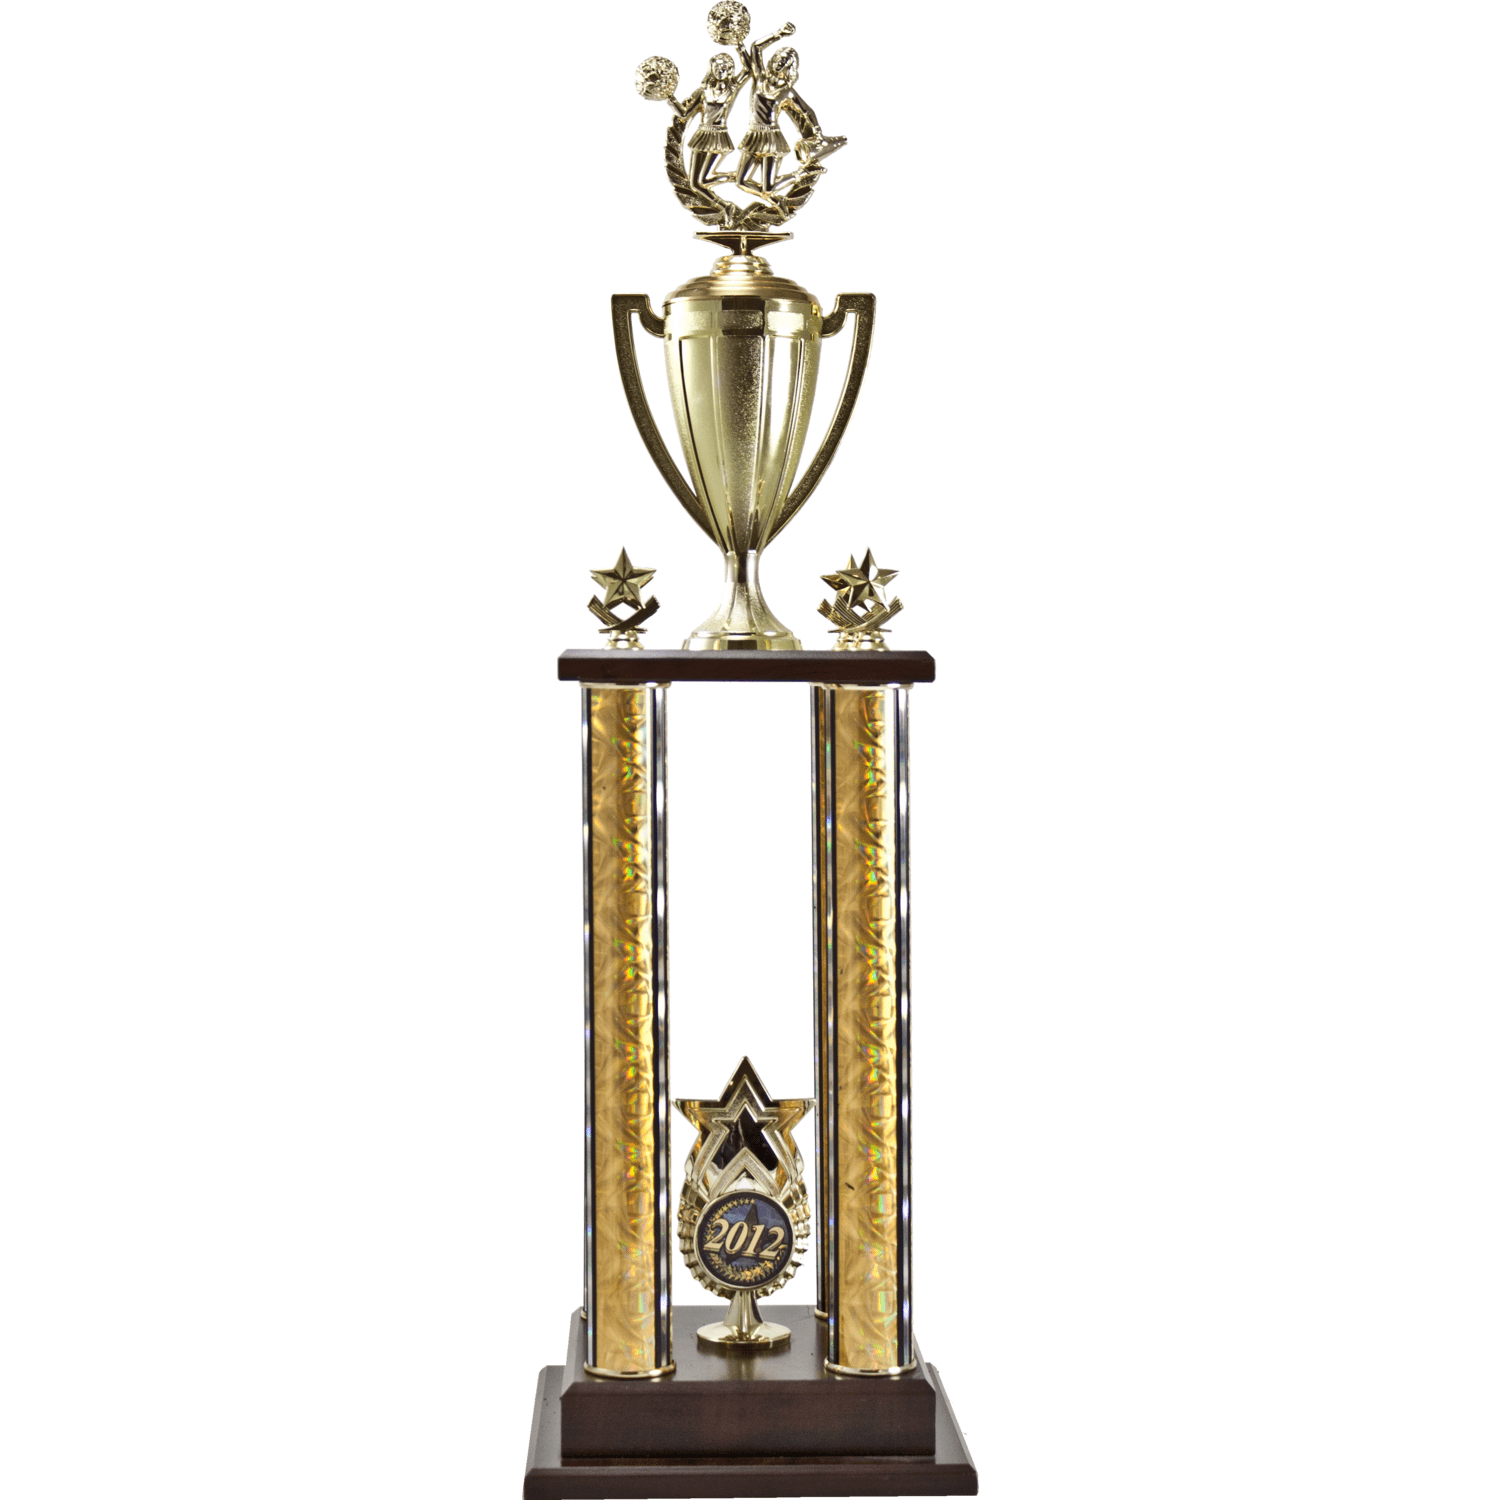 Two-Tier 4 Post Trophy With Star "Exclusive" Star | Global Recognition Inc